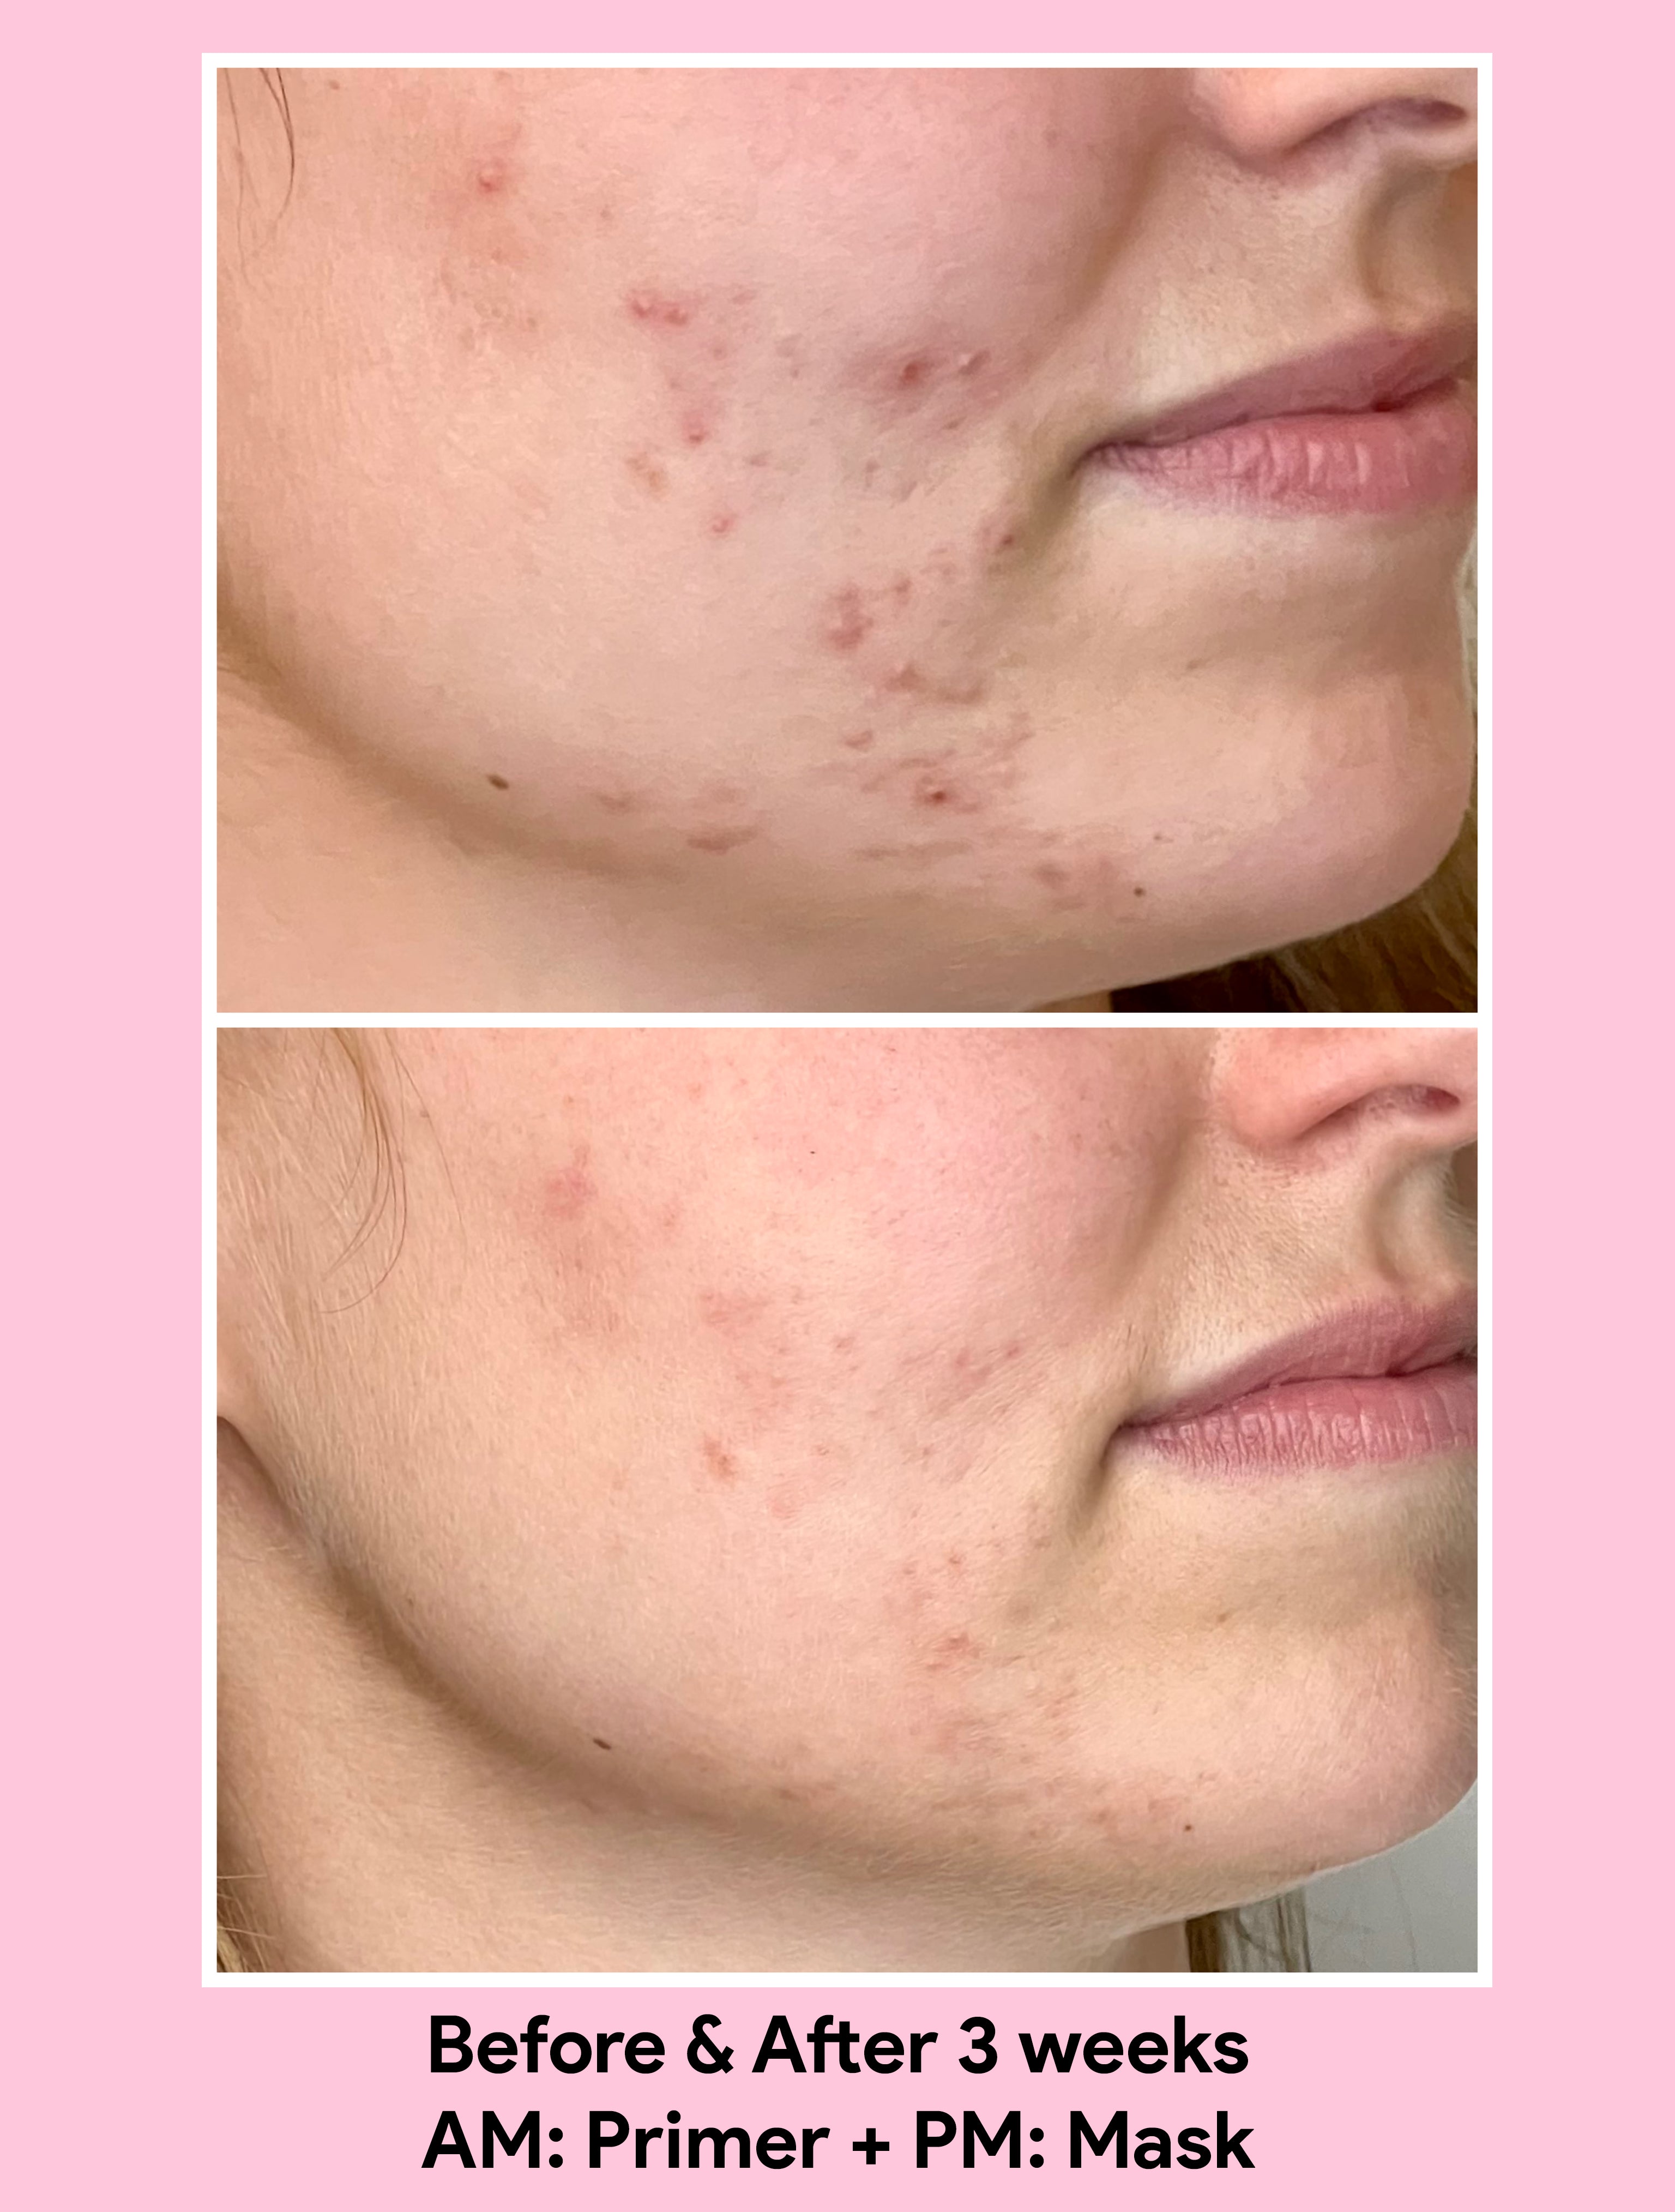 Before and After use of Jori Primer and Mask revealing clear skin after 3 weeks.